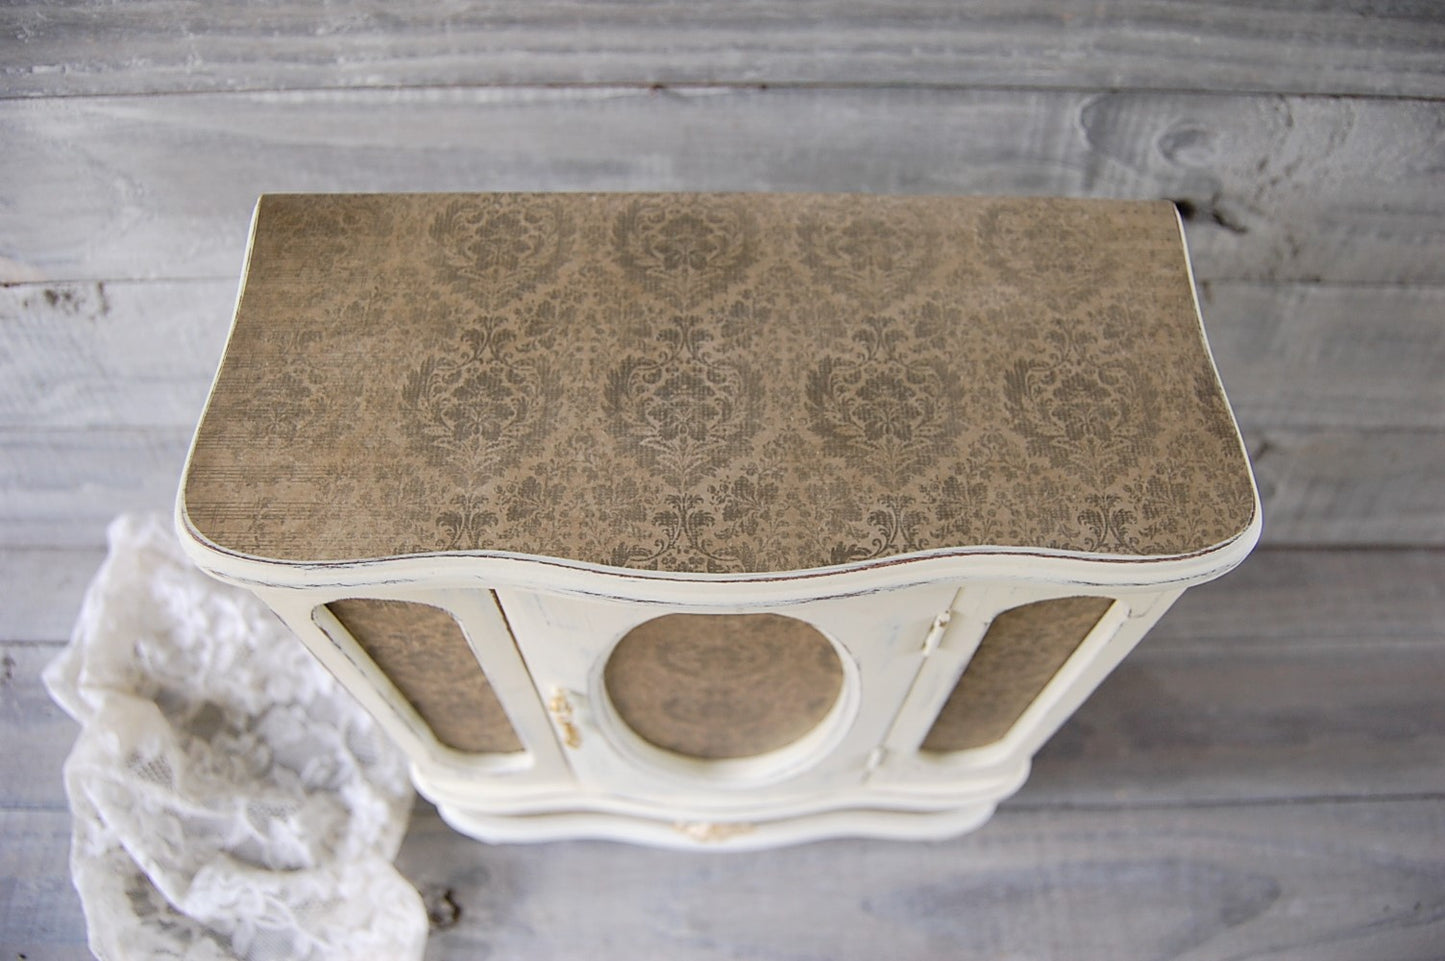 Ivory damask armoire